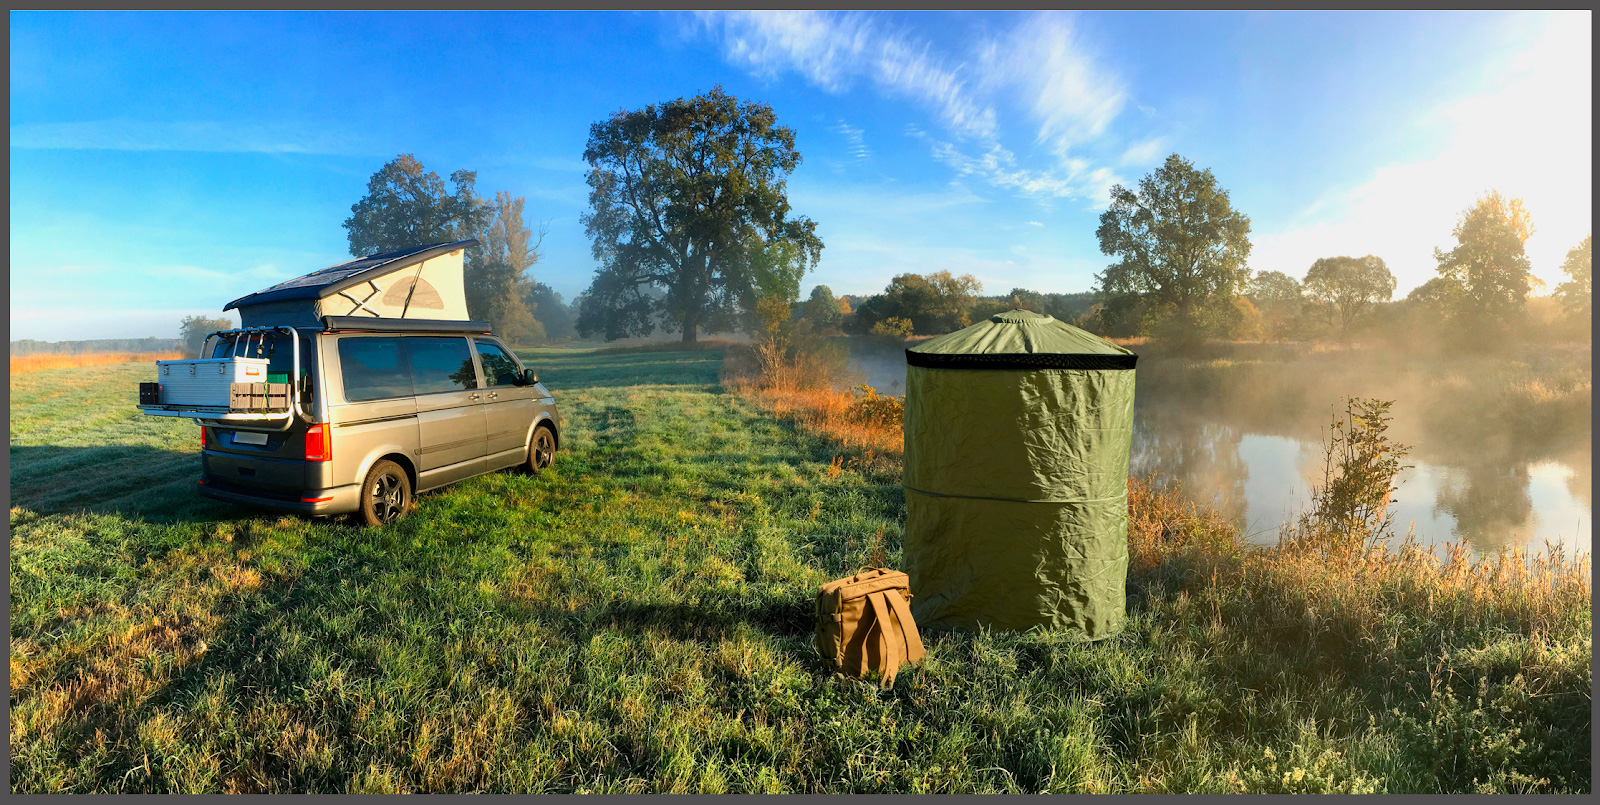 Outdoors camping with Instaprivy setup